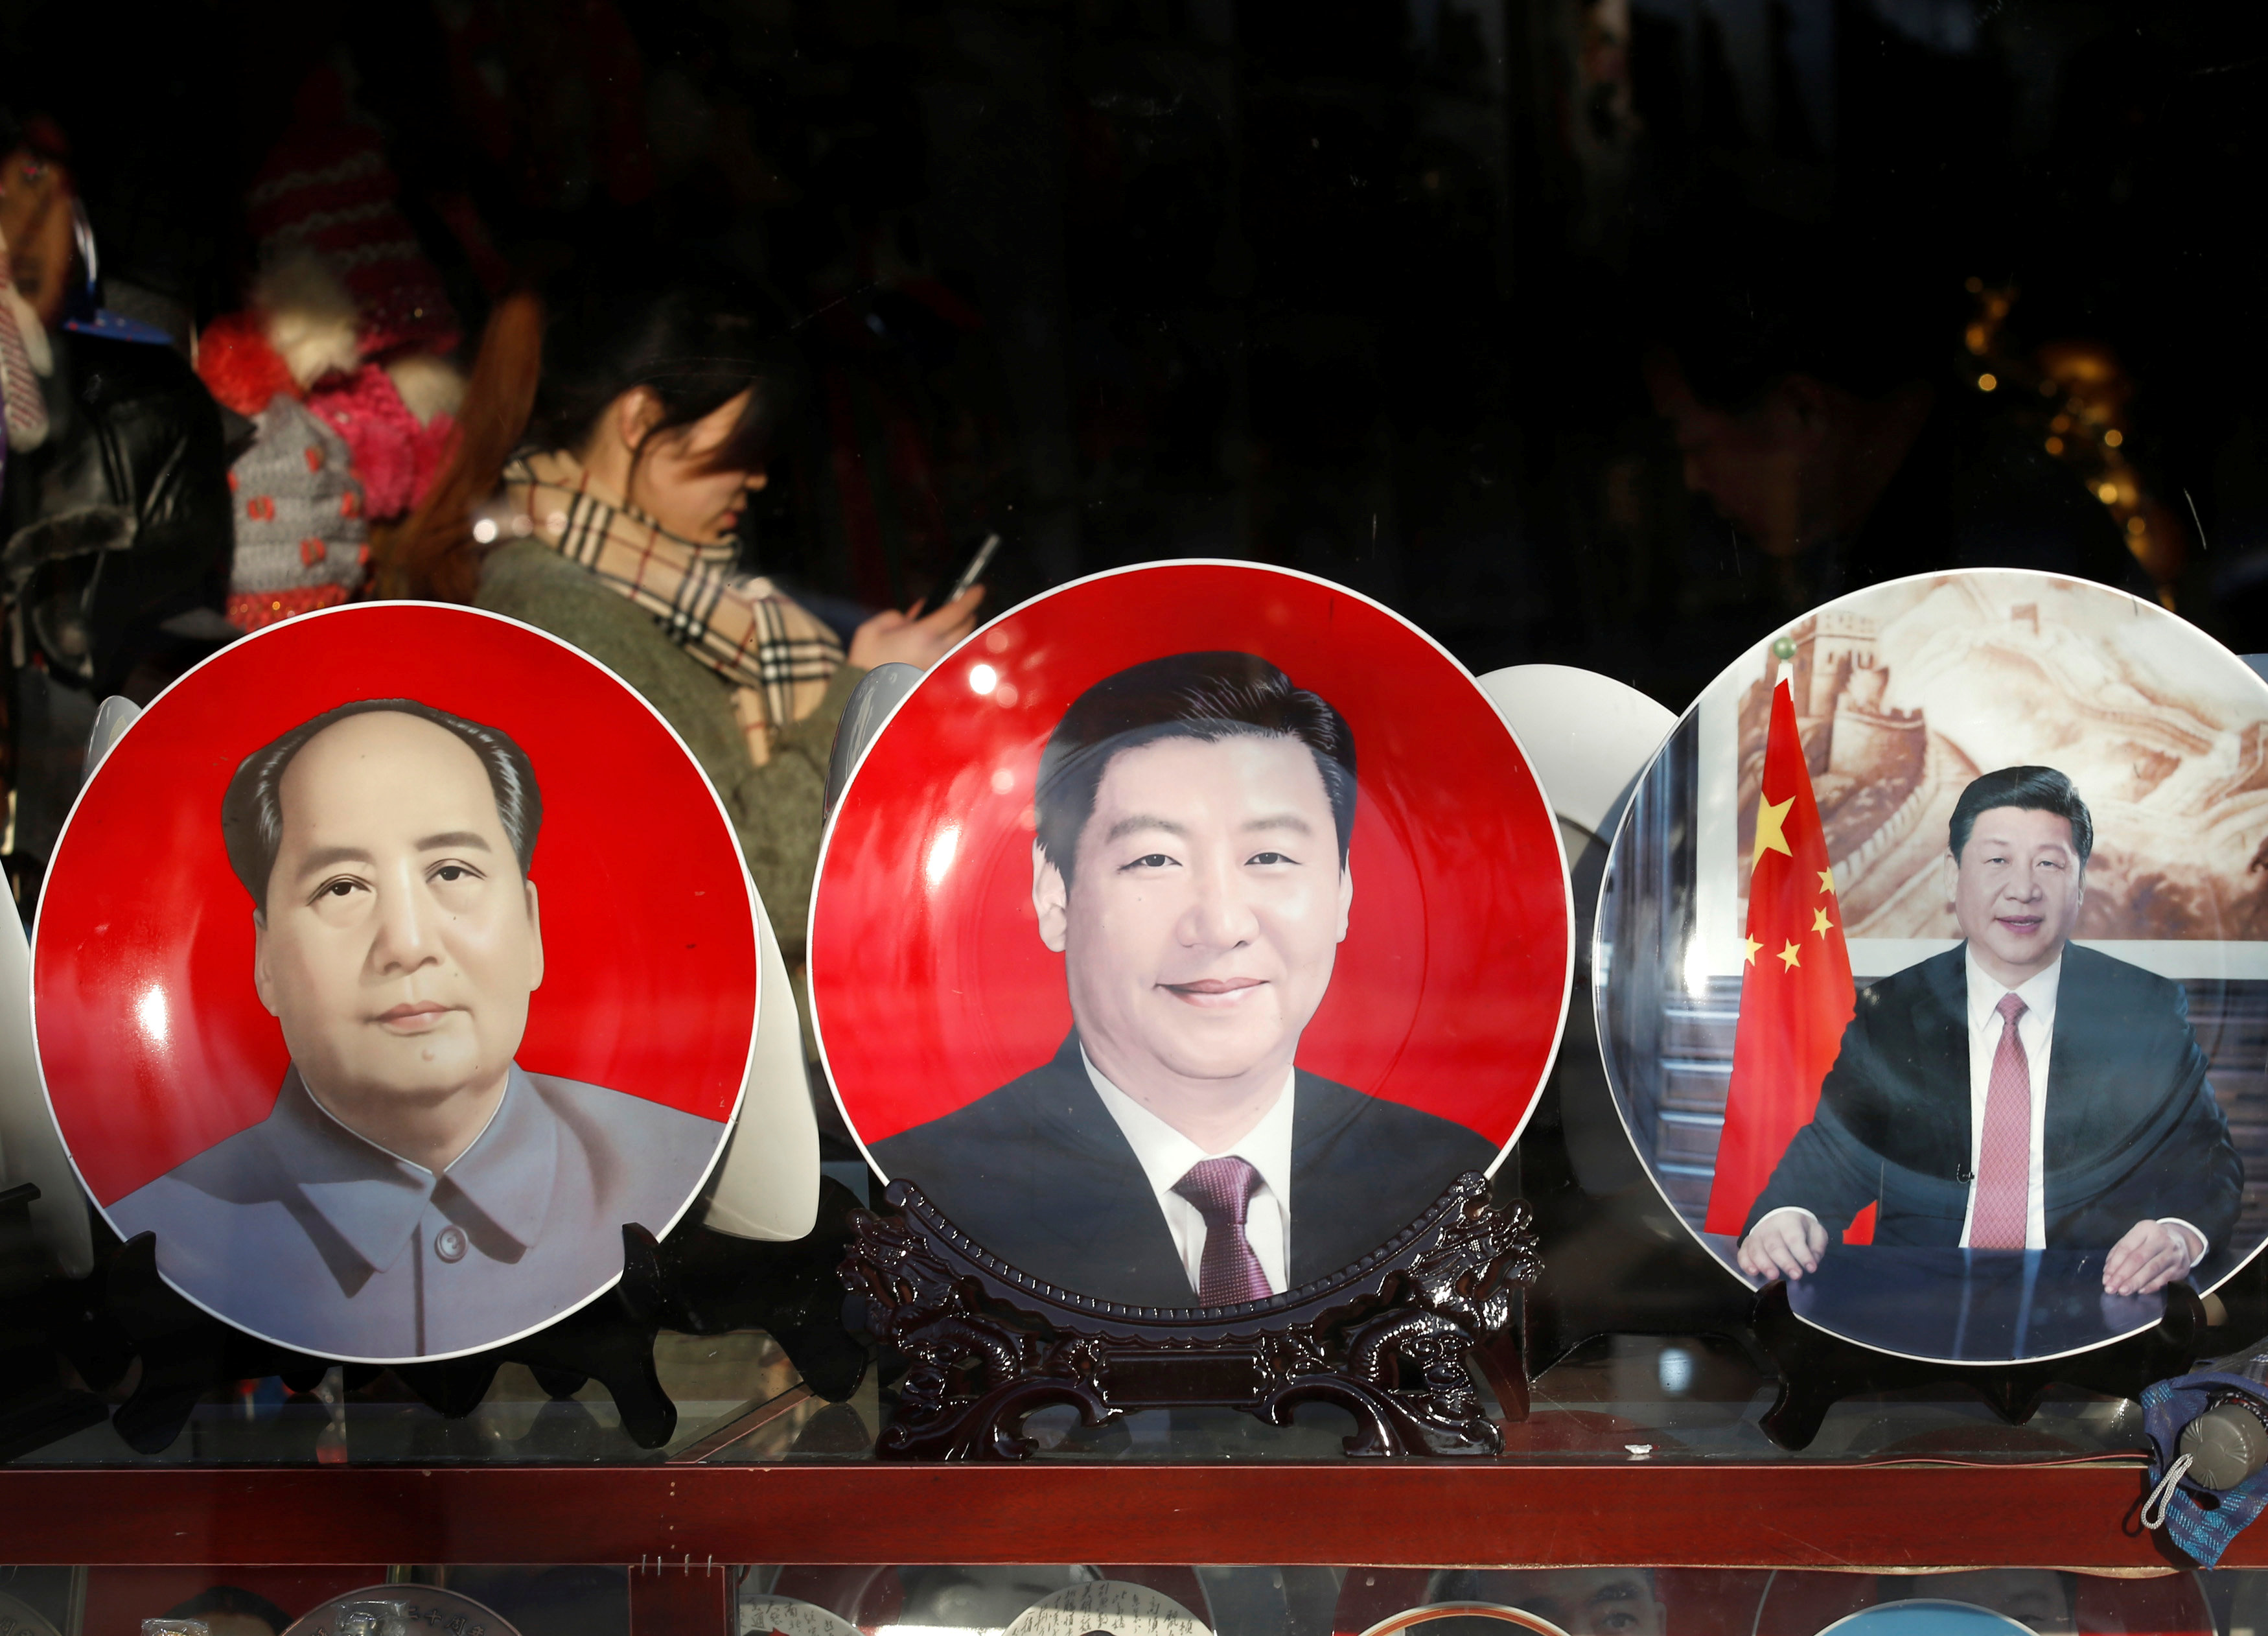 China's neo-Maoists welcome Xi's new era, but say he is not the new Mao